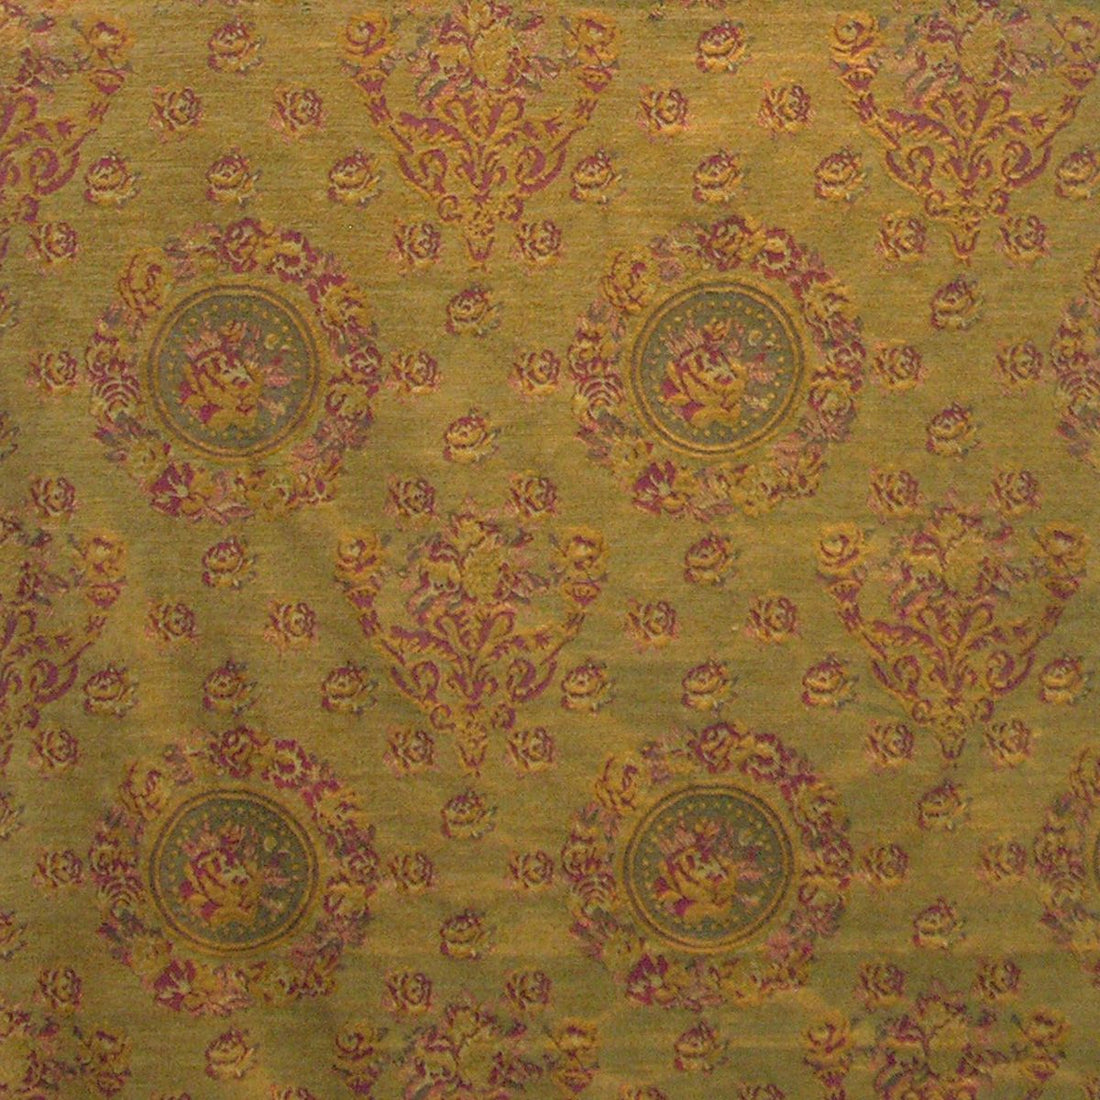 Marengo fabric in dijon color - pattern number ET 00021216 - by Scalamandre in the Old World Weavers collection